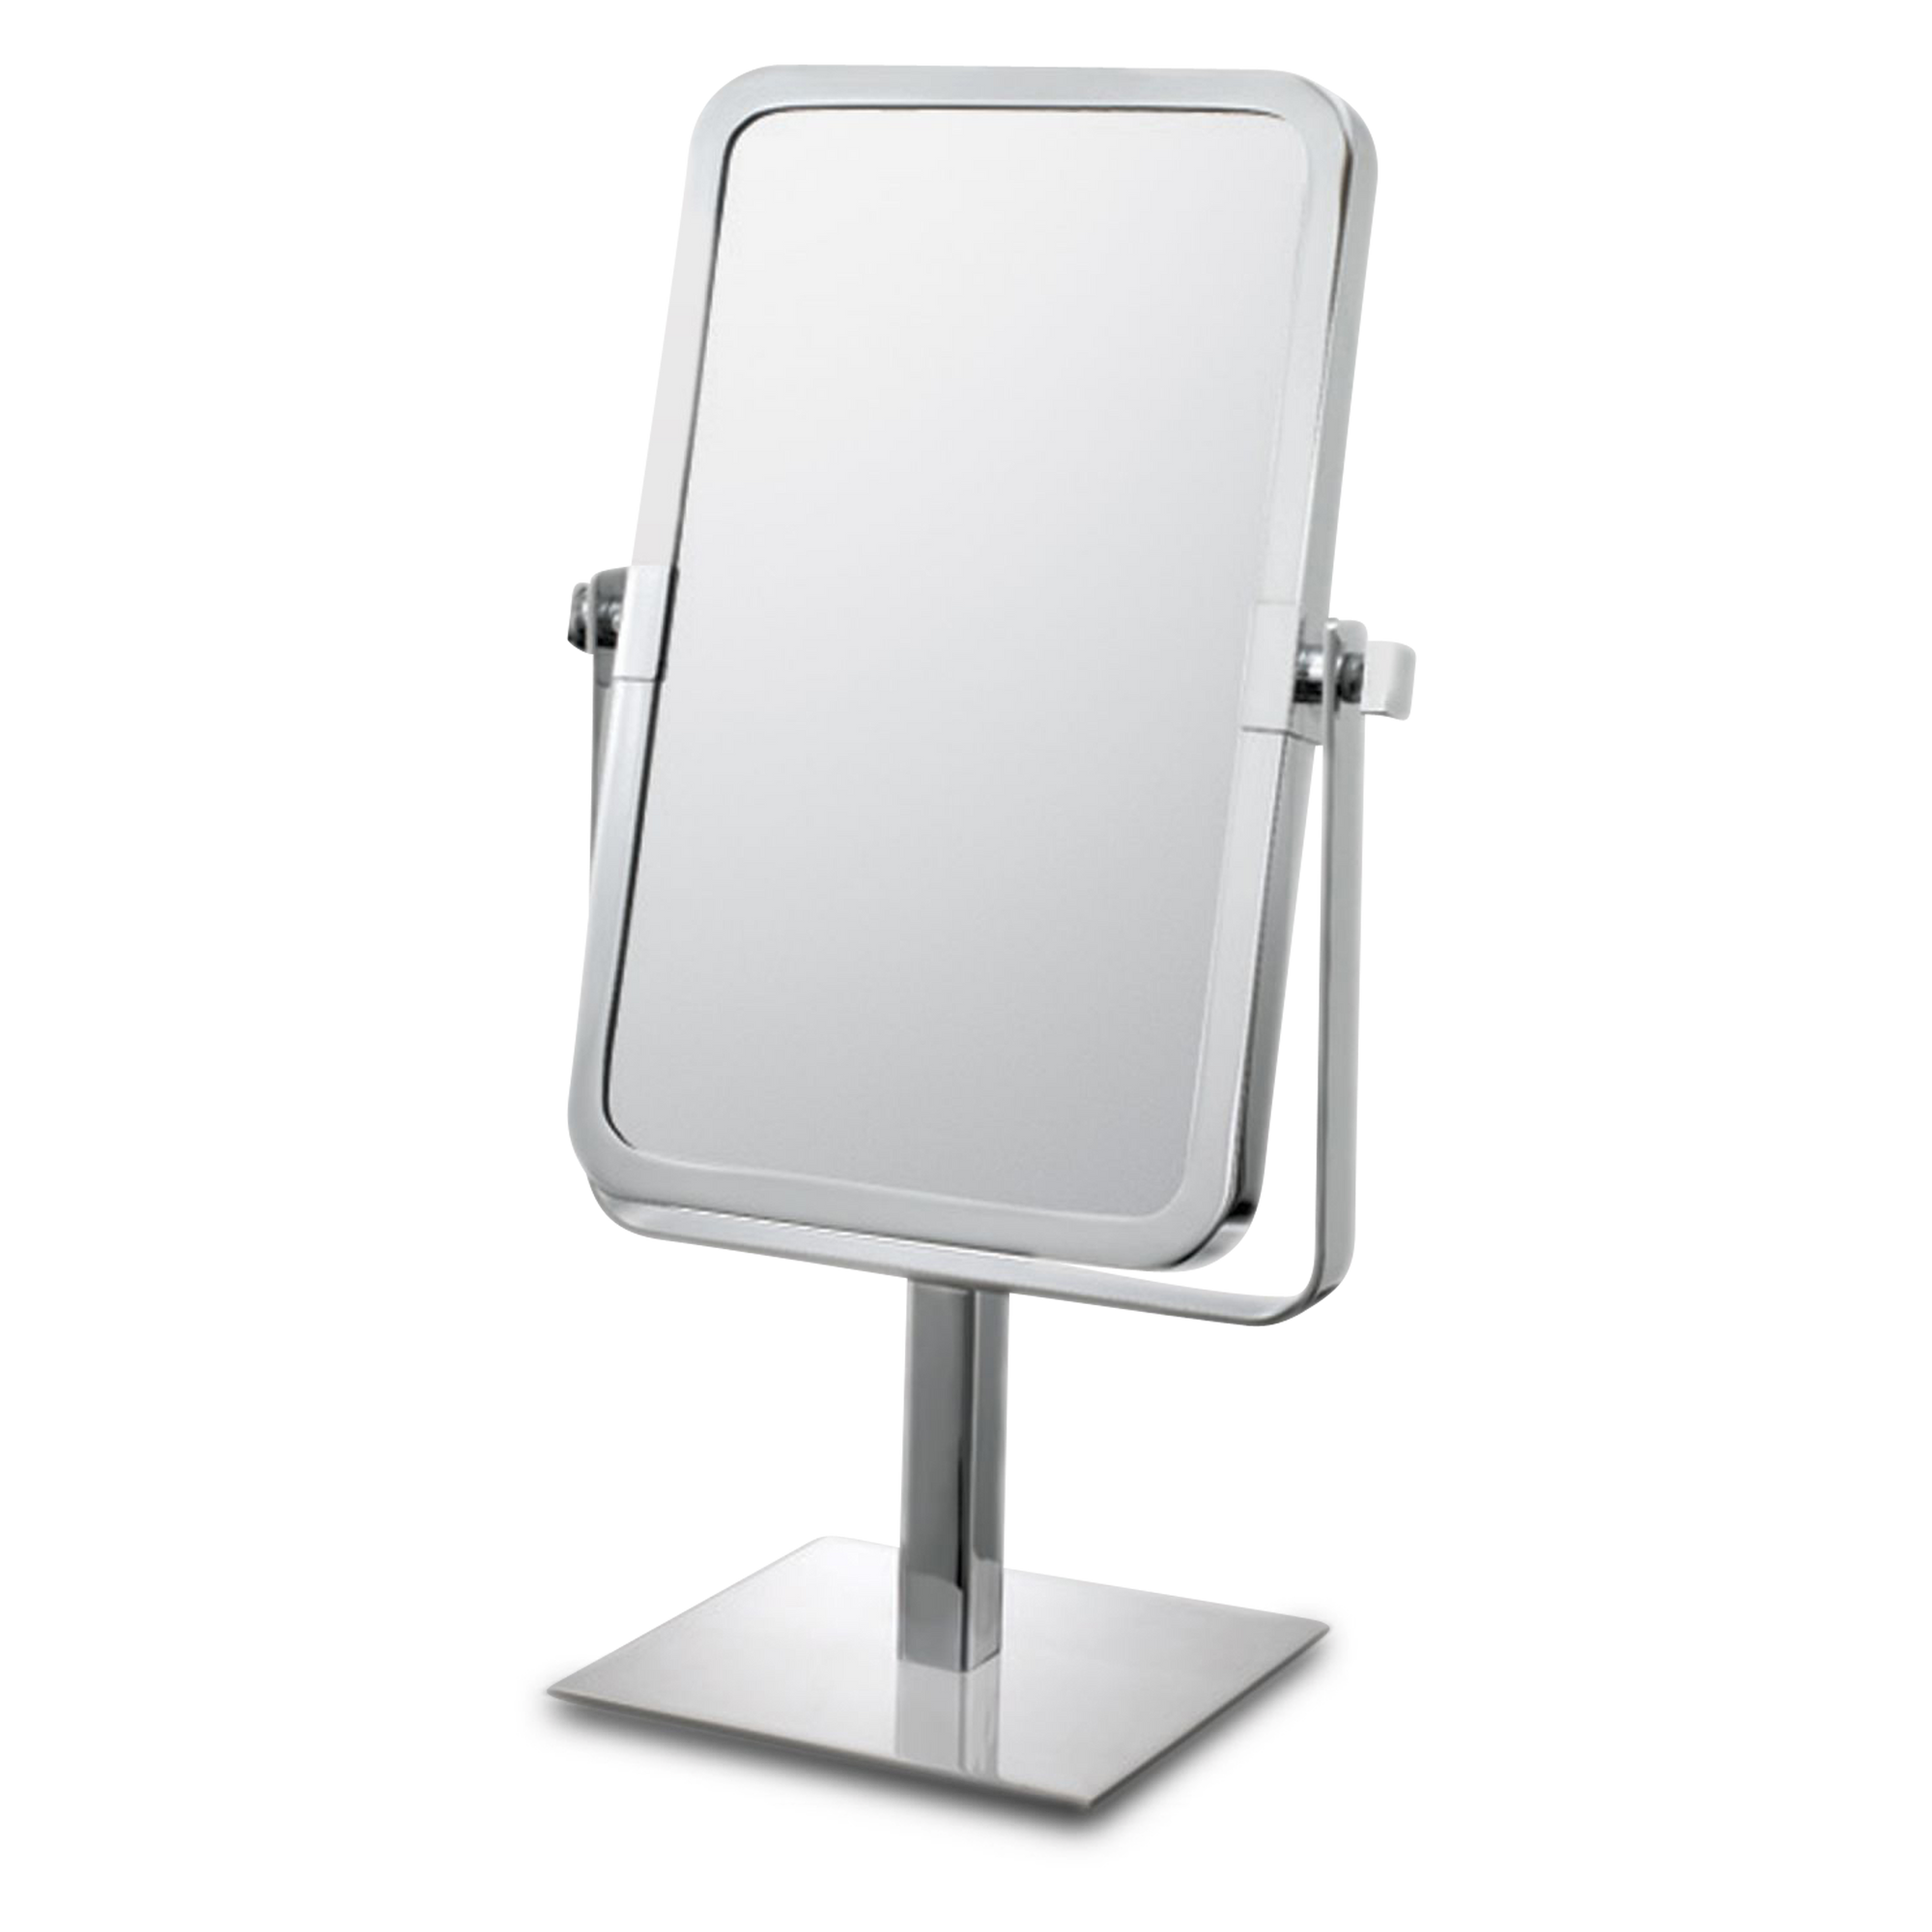 A sleek, modern, table mirror featuring a rectangular shape with slight concavity, giving it 3X magnification.